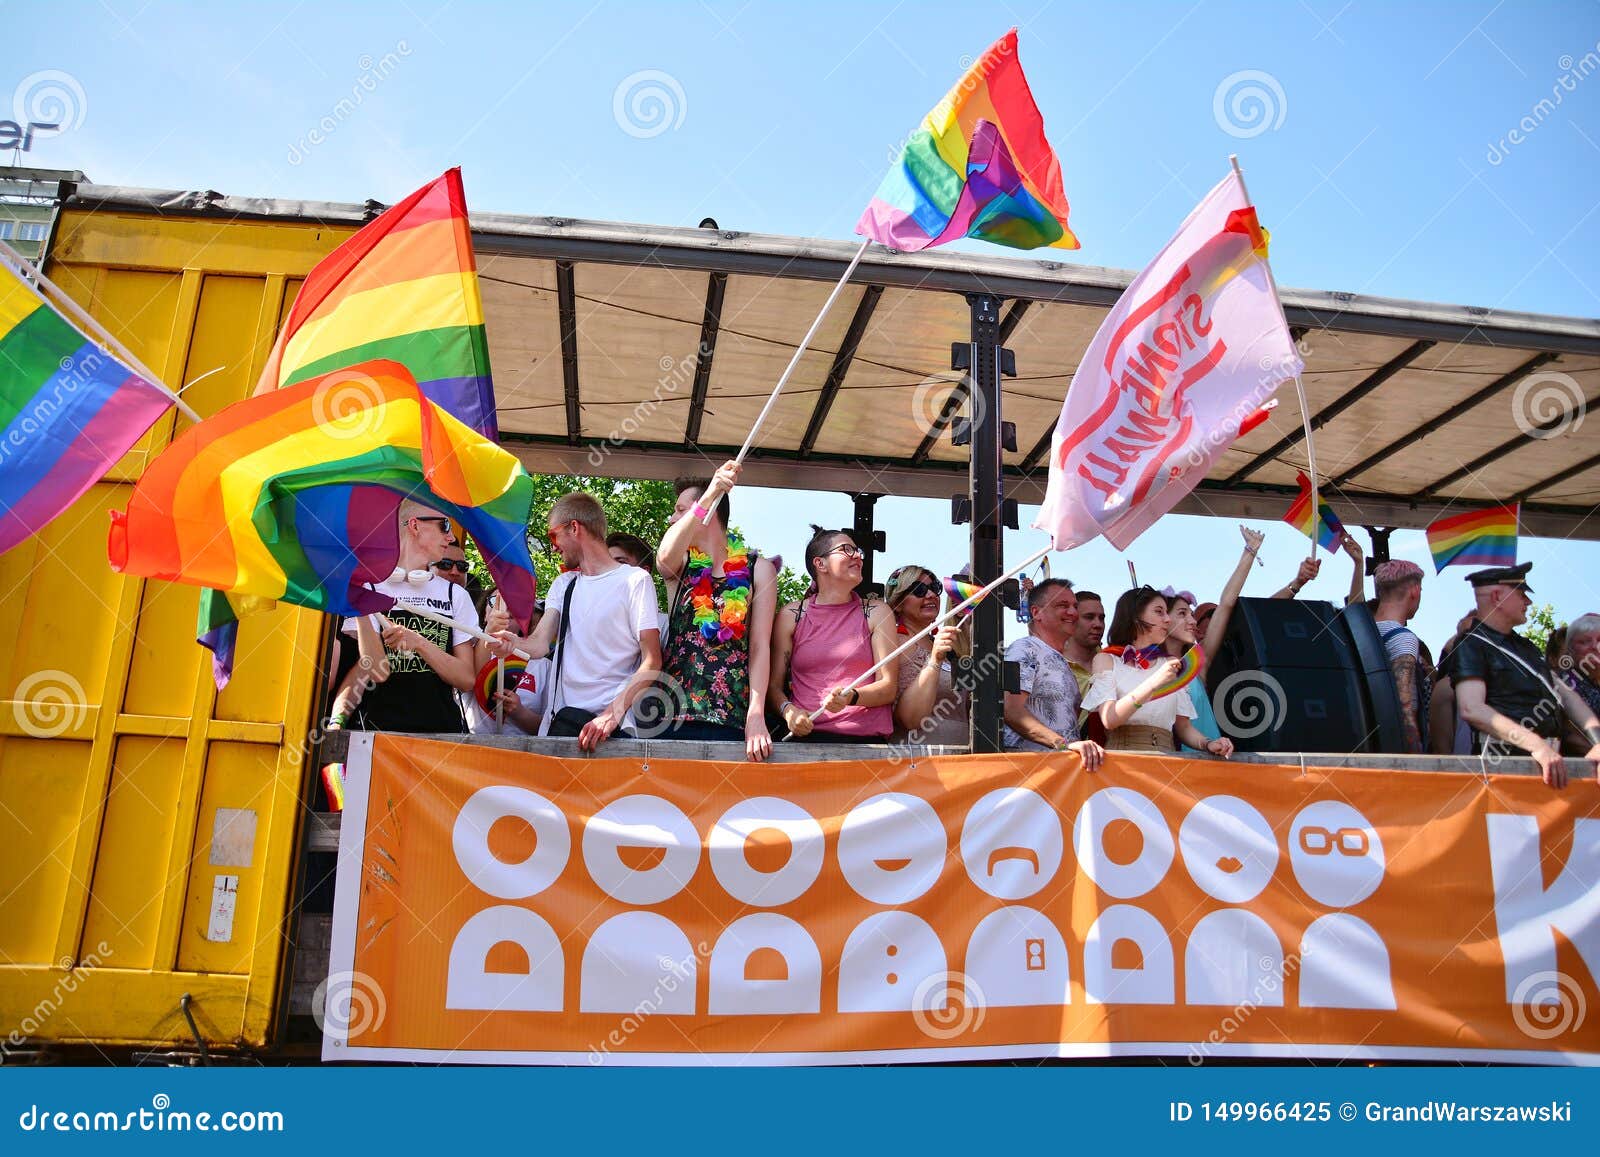 Warsaw`s Equality Paradethe Largest Gay Pride Parade In Central And Eastern Europe Brought 